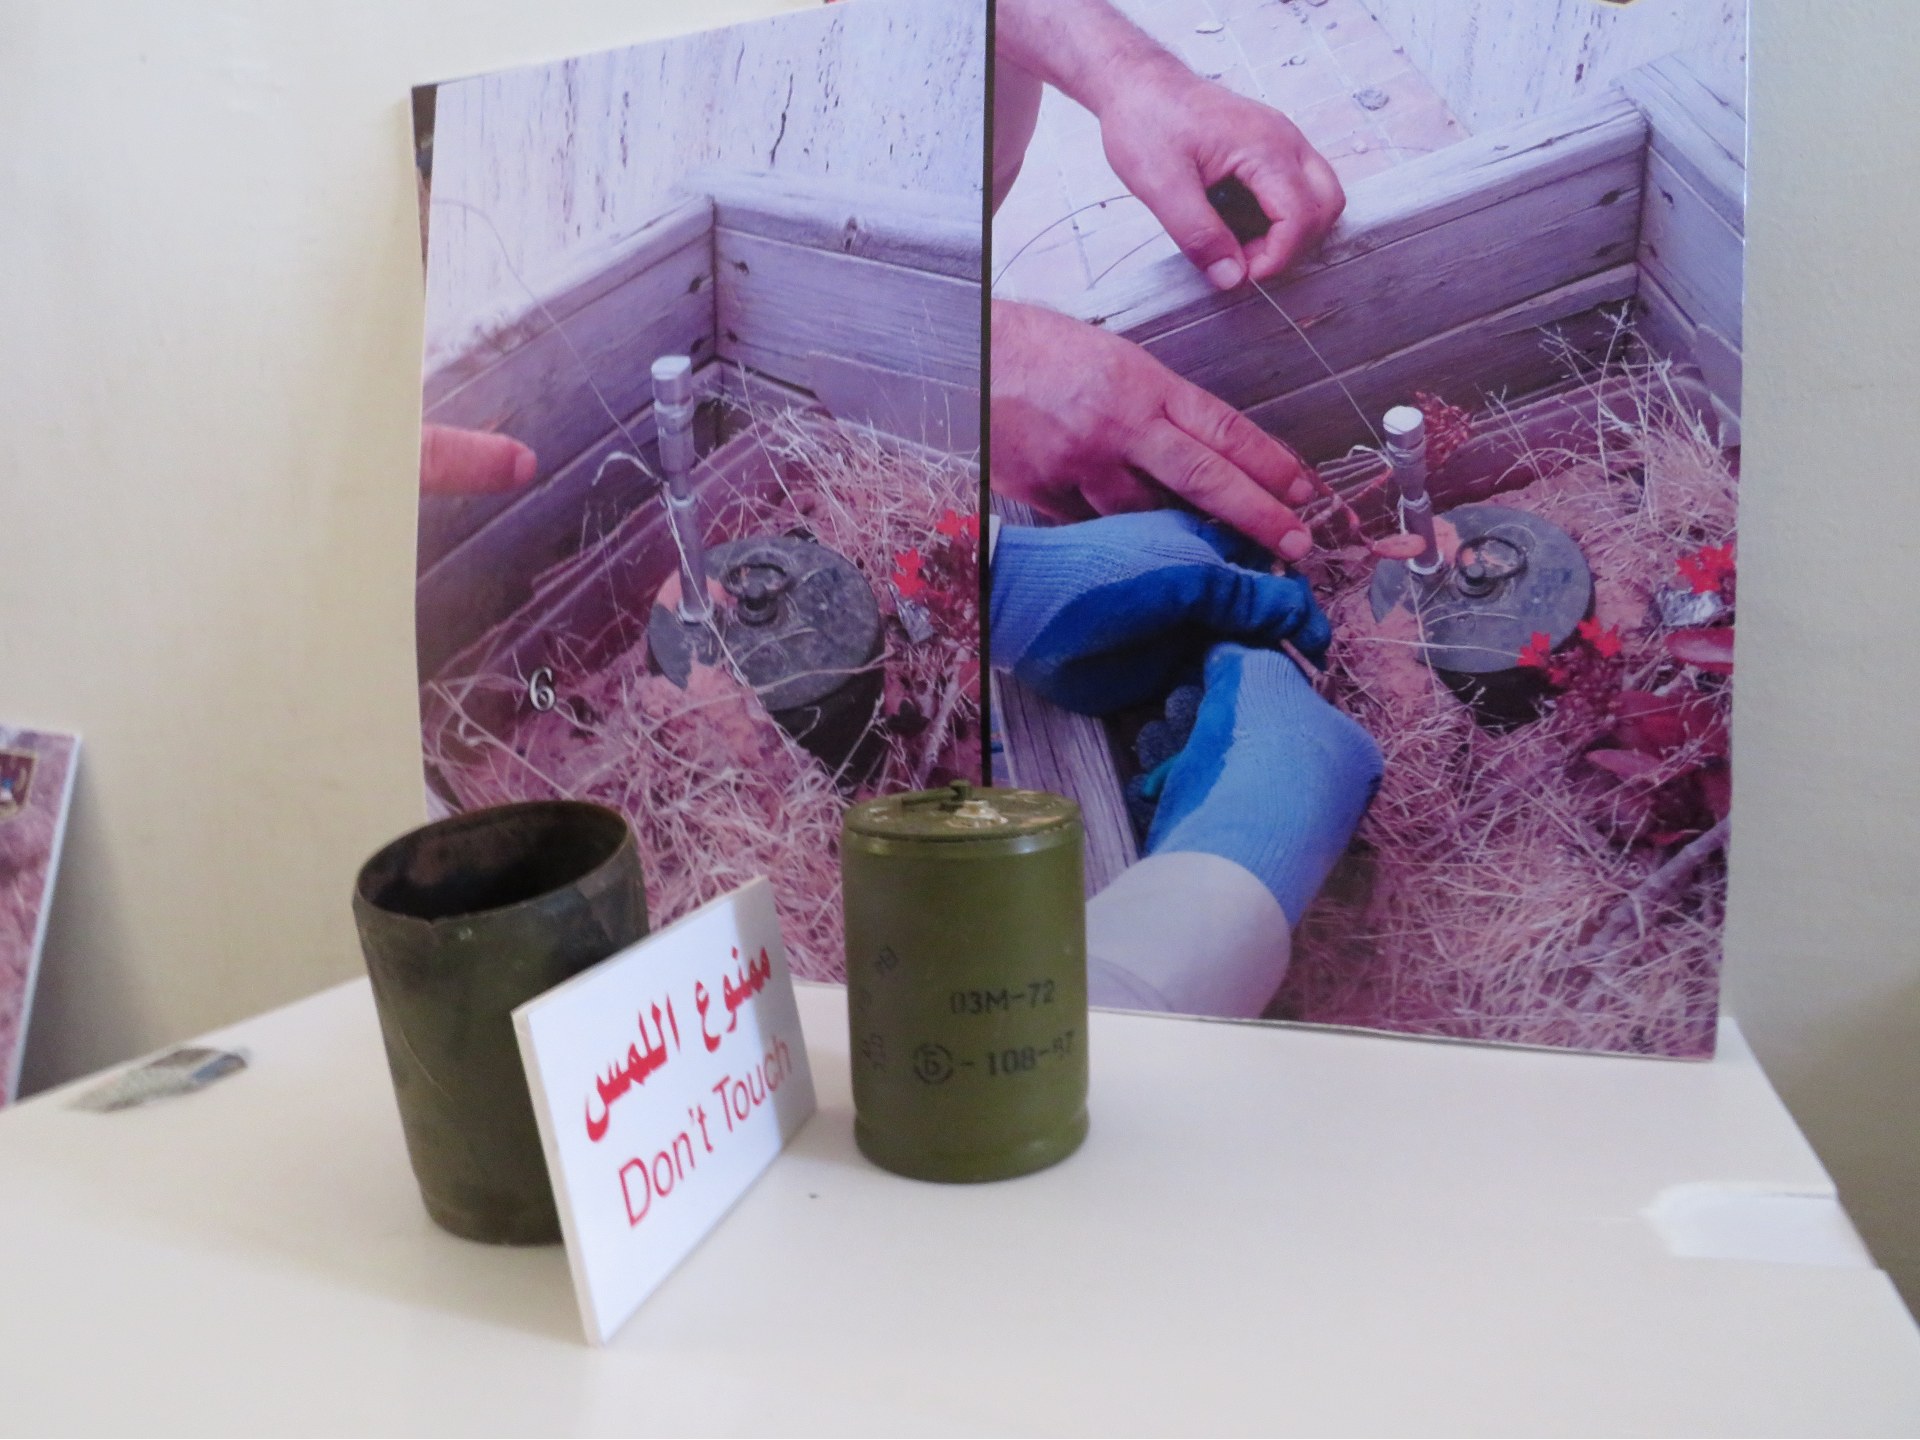 OZM-72 mines in front of photographs of one of their model found in situ in Tripoli (MEE/Daniel Hilton)